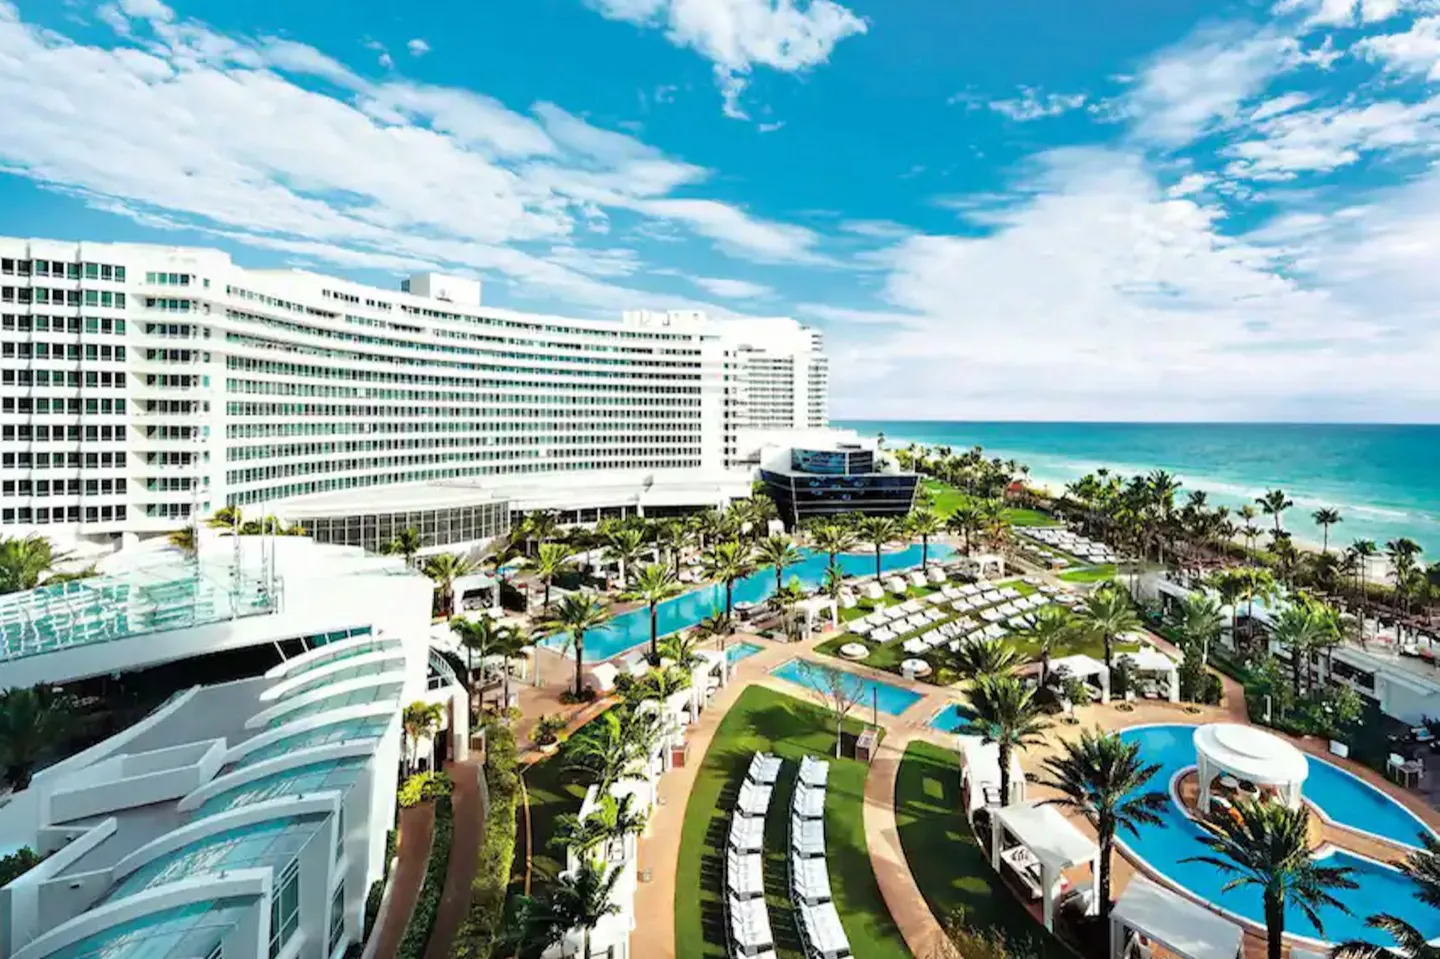 Stay in a 5-star hotel in South Beach for the F1 Miami Grand Prix weekend